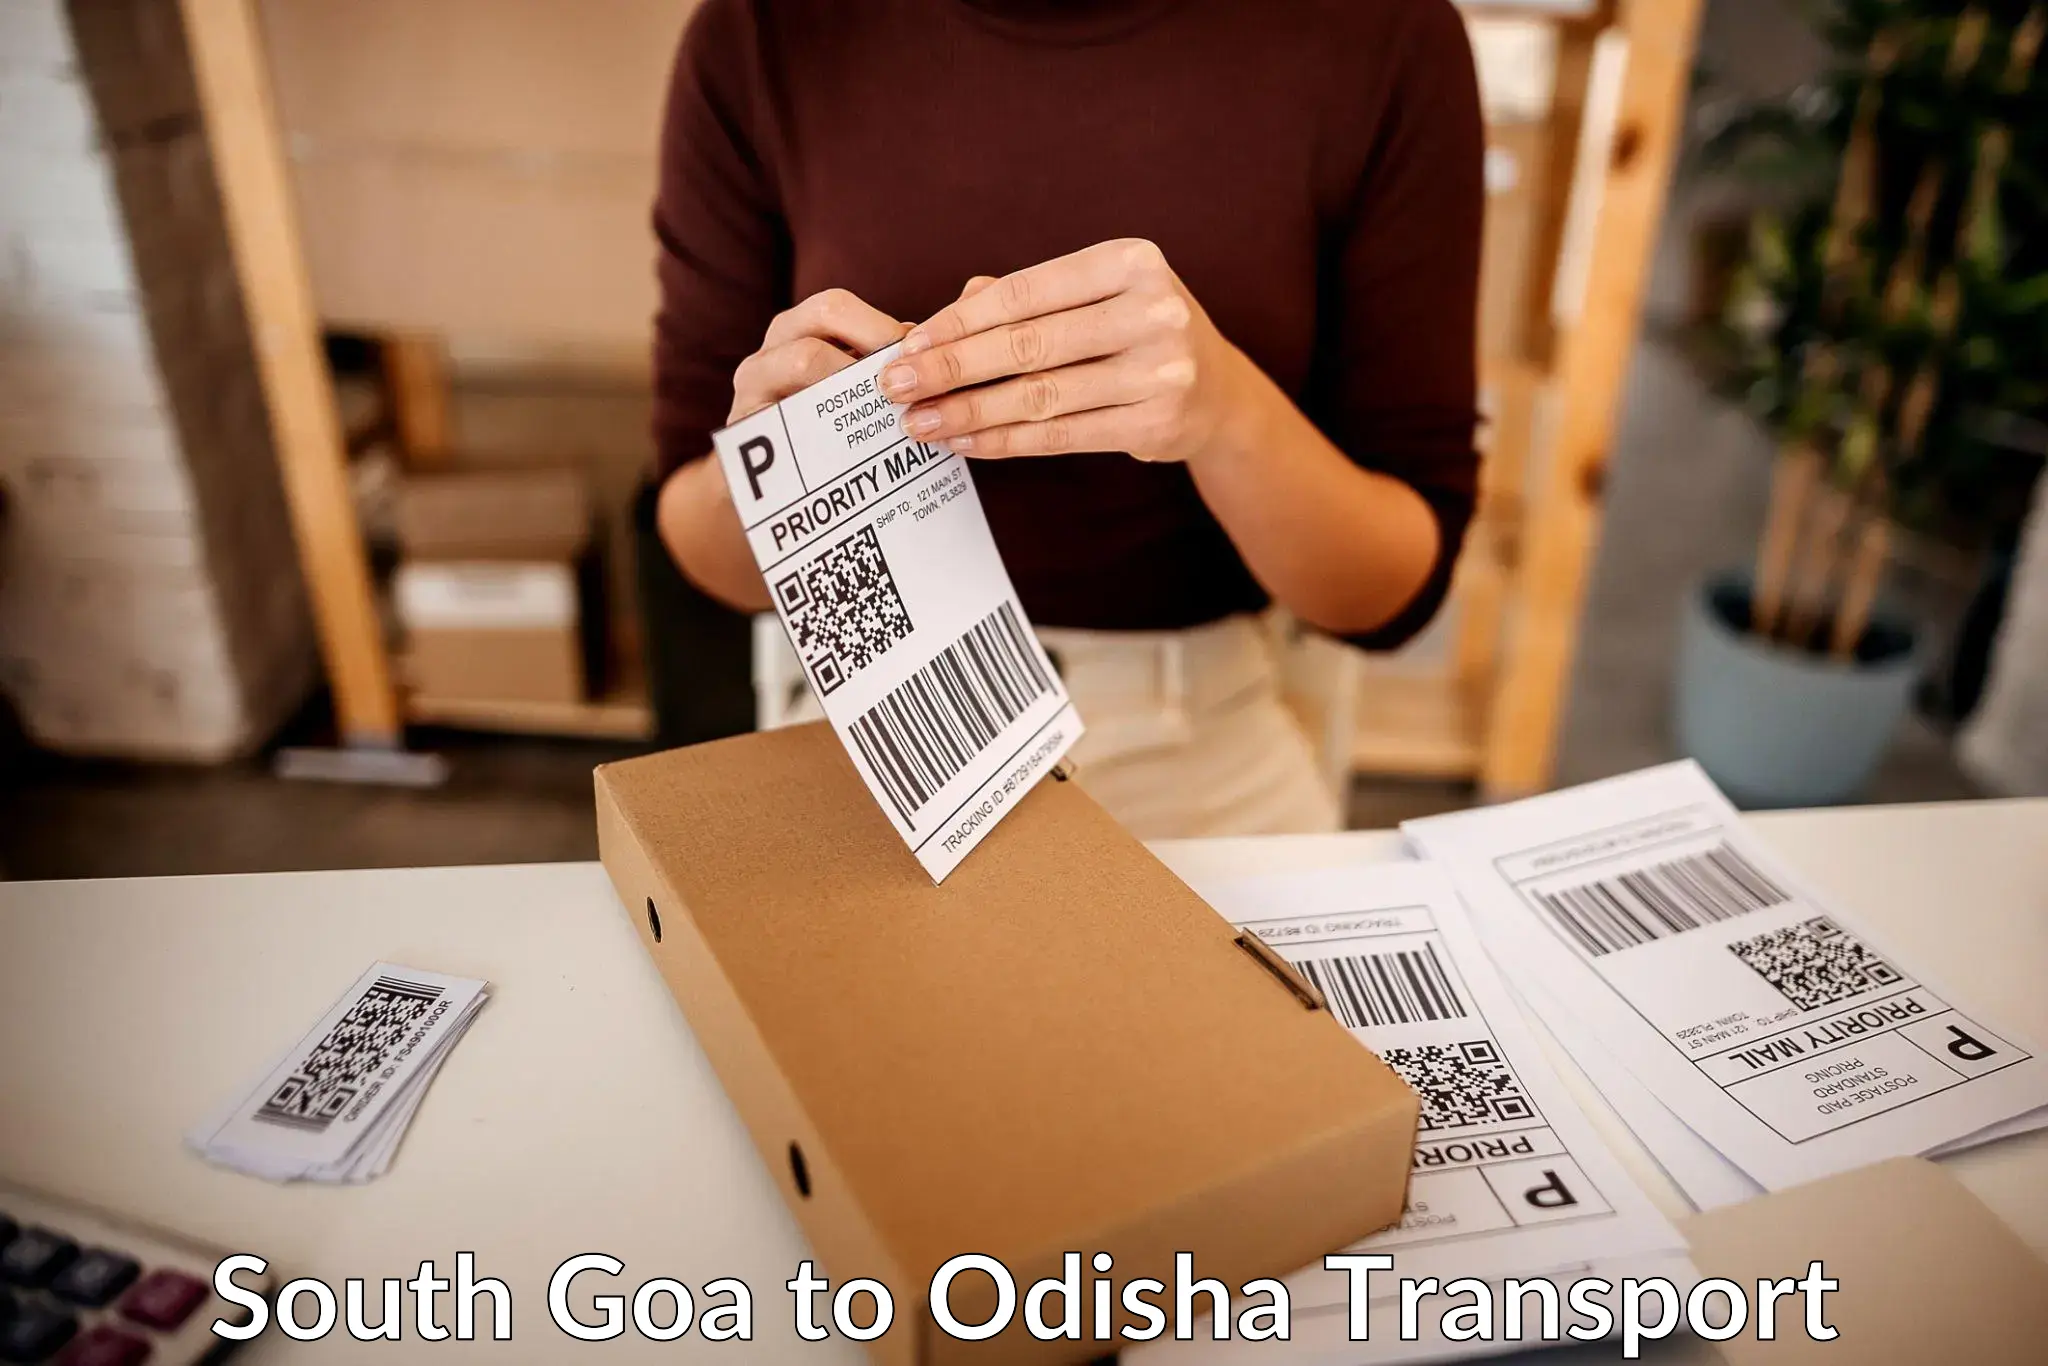 Land transport services in South Goa to Sonepur